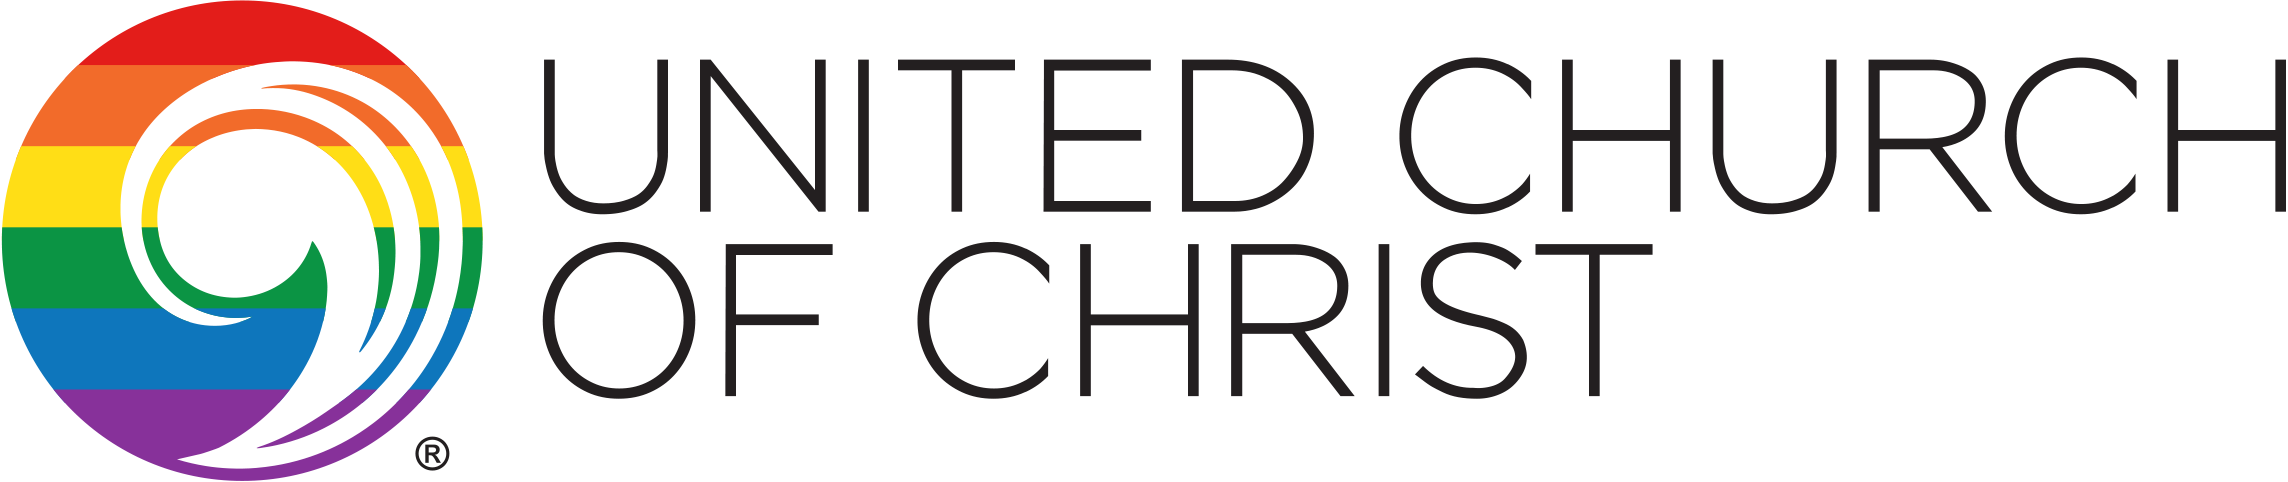 Uninted Church of Christ